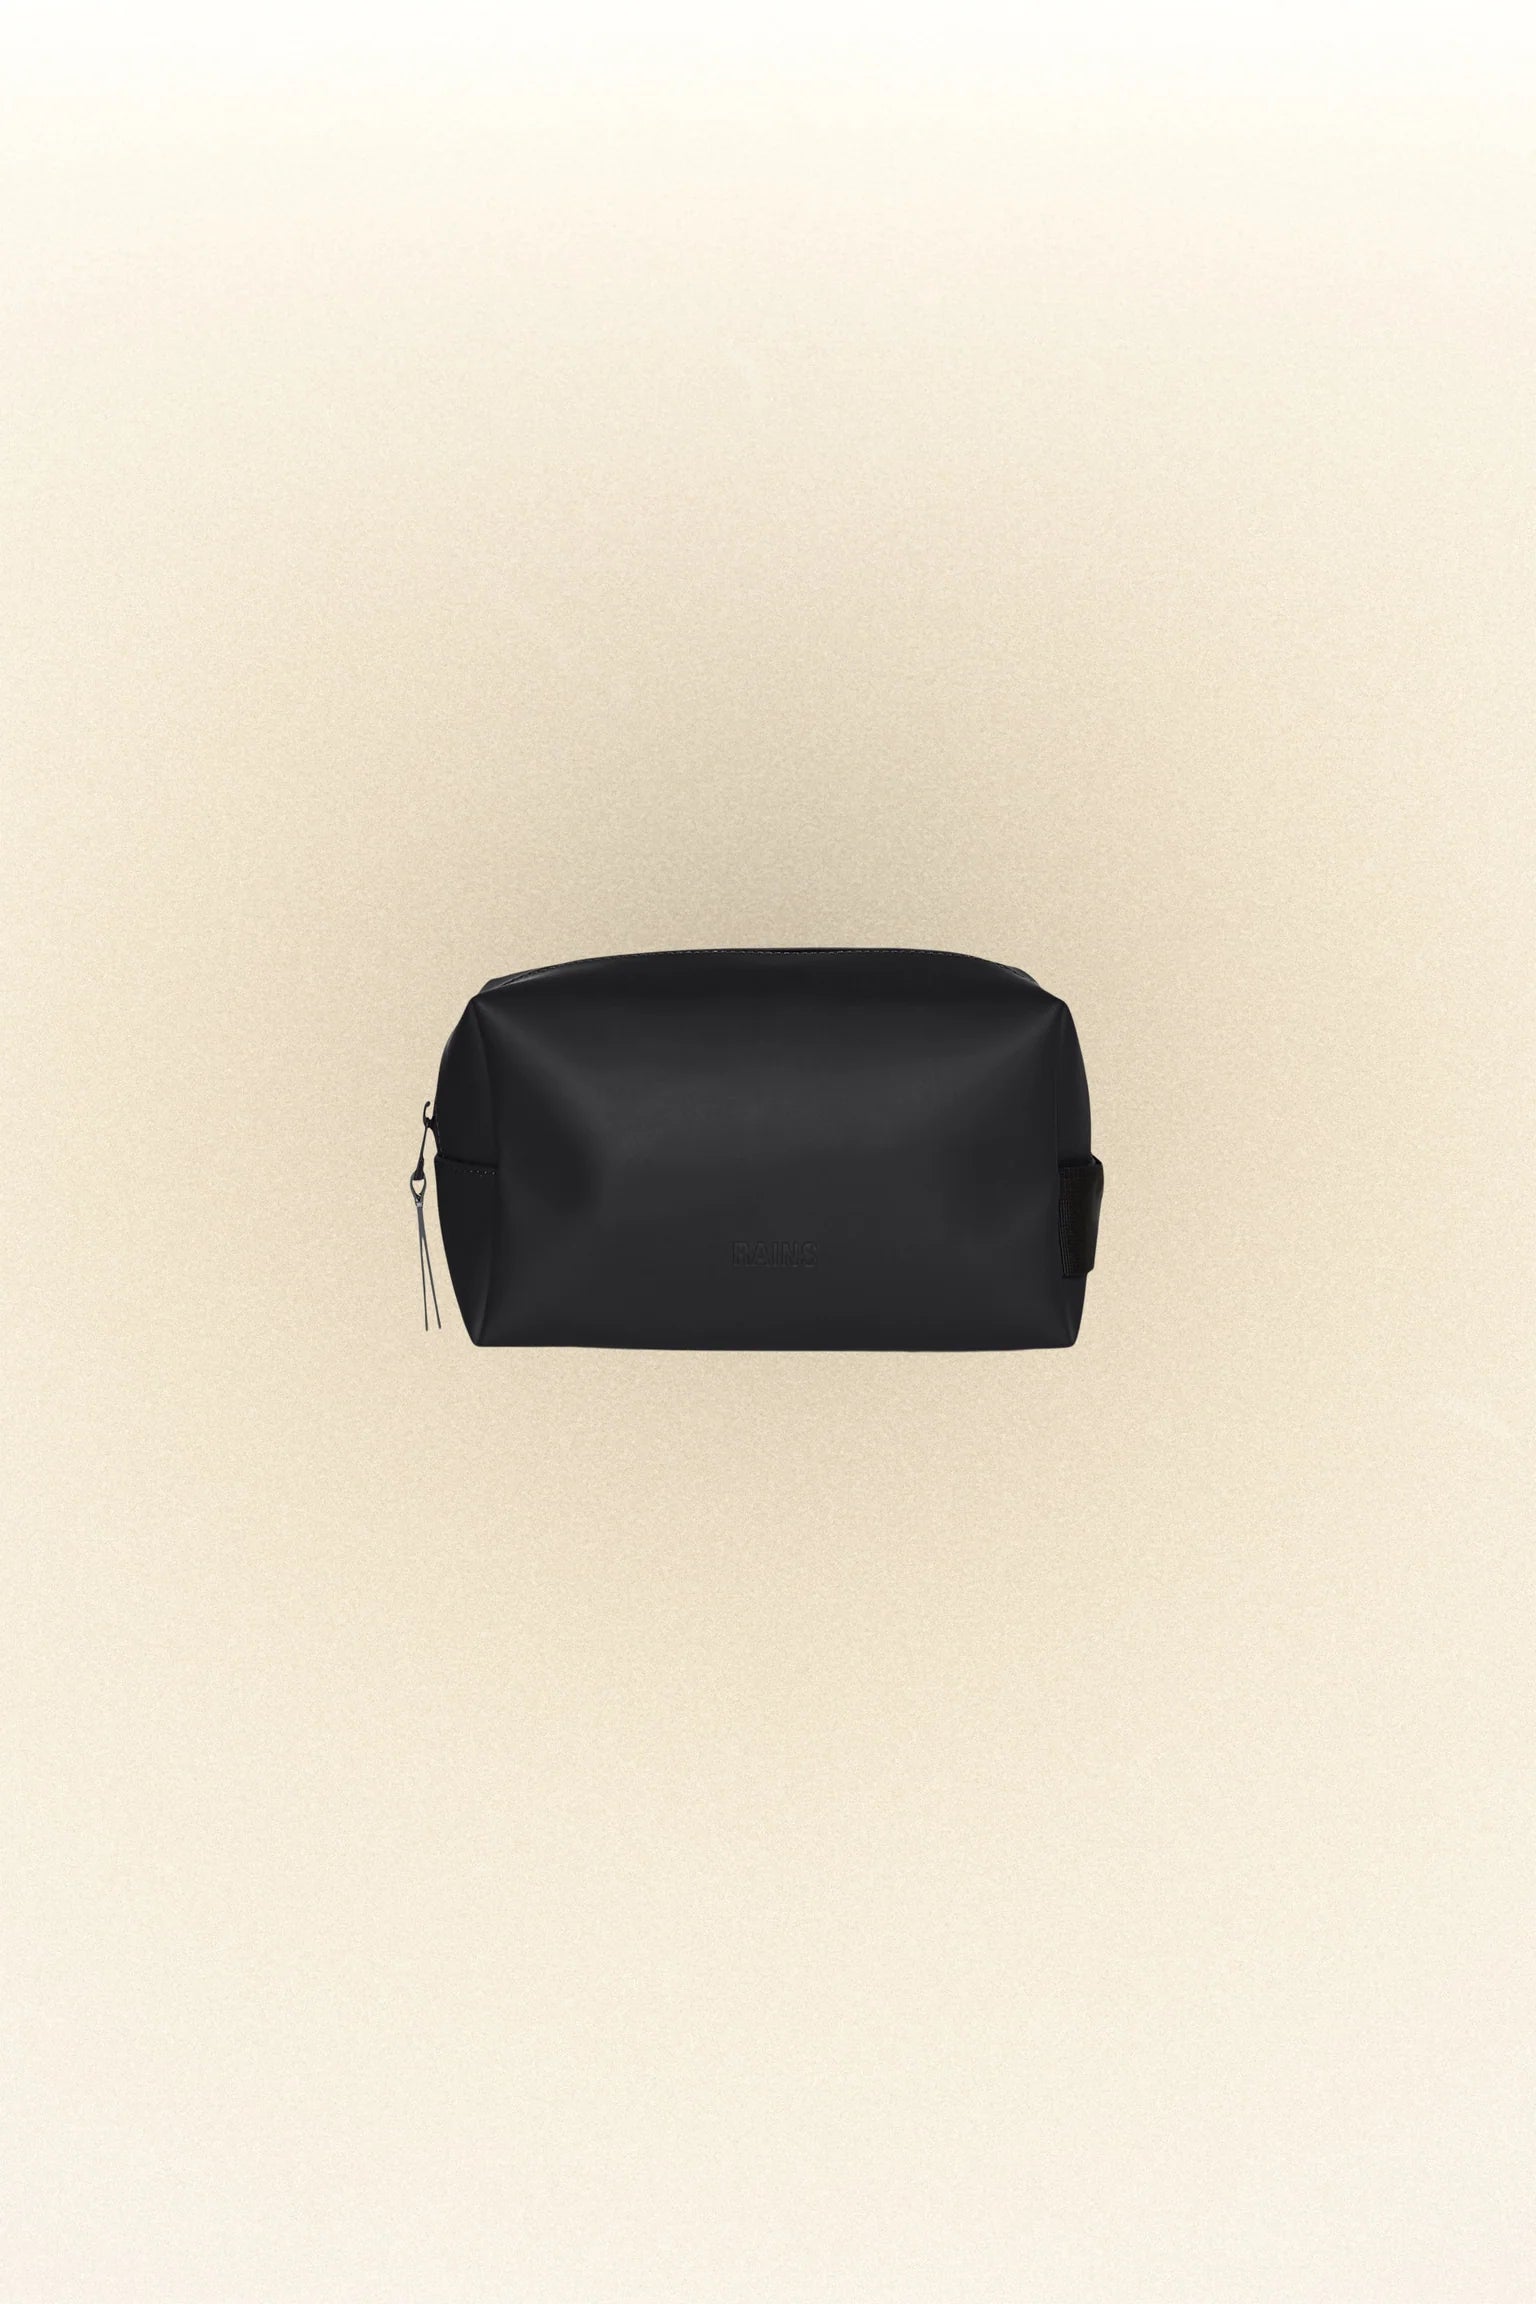 A Rains Wash Bag Small made of waterproof black leather for toiletries.